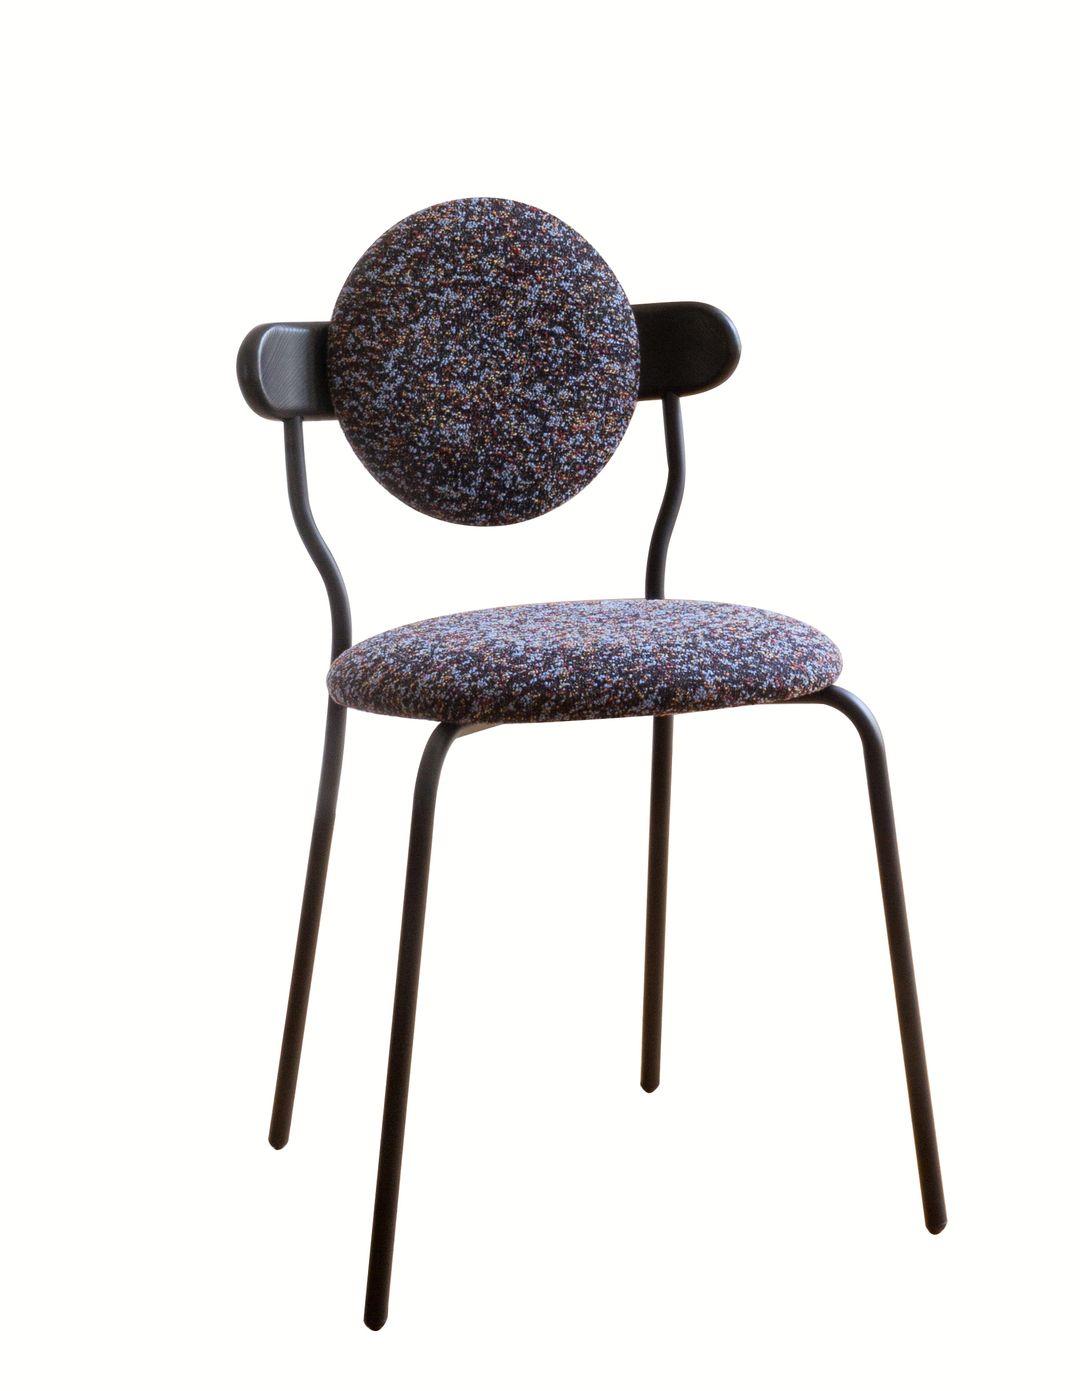 Planet is an upholstered chair inspired by the distinctive silhouette of planet Saturn. The upholstered seat and back ensures a high level of comfort, but Planet chair remains a featherweight at only six kilos for practical use every day.

It is